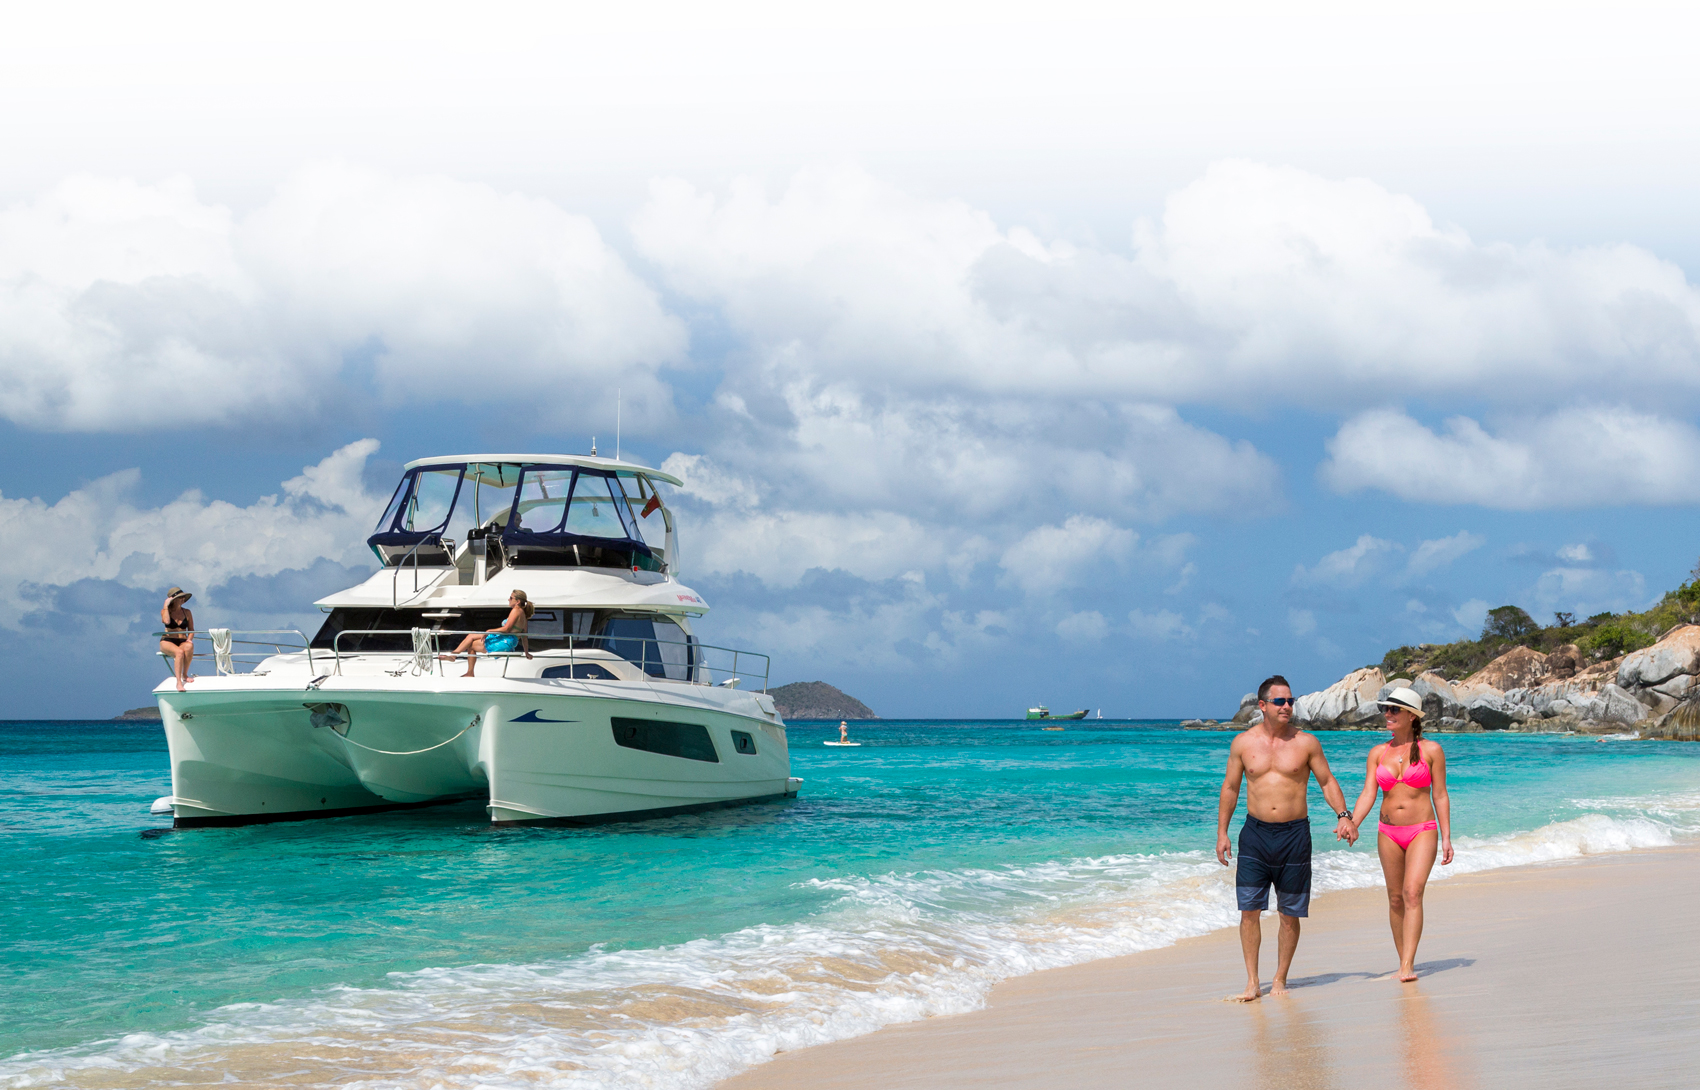 MarineMax vessel near the shore of a beach with couple walking in foreground